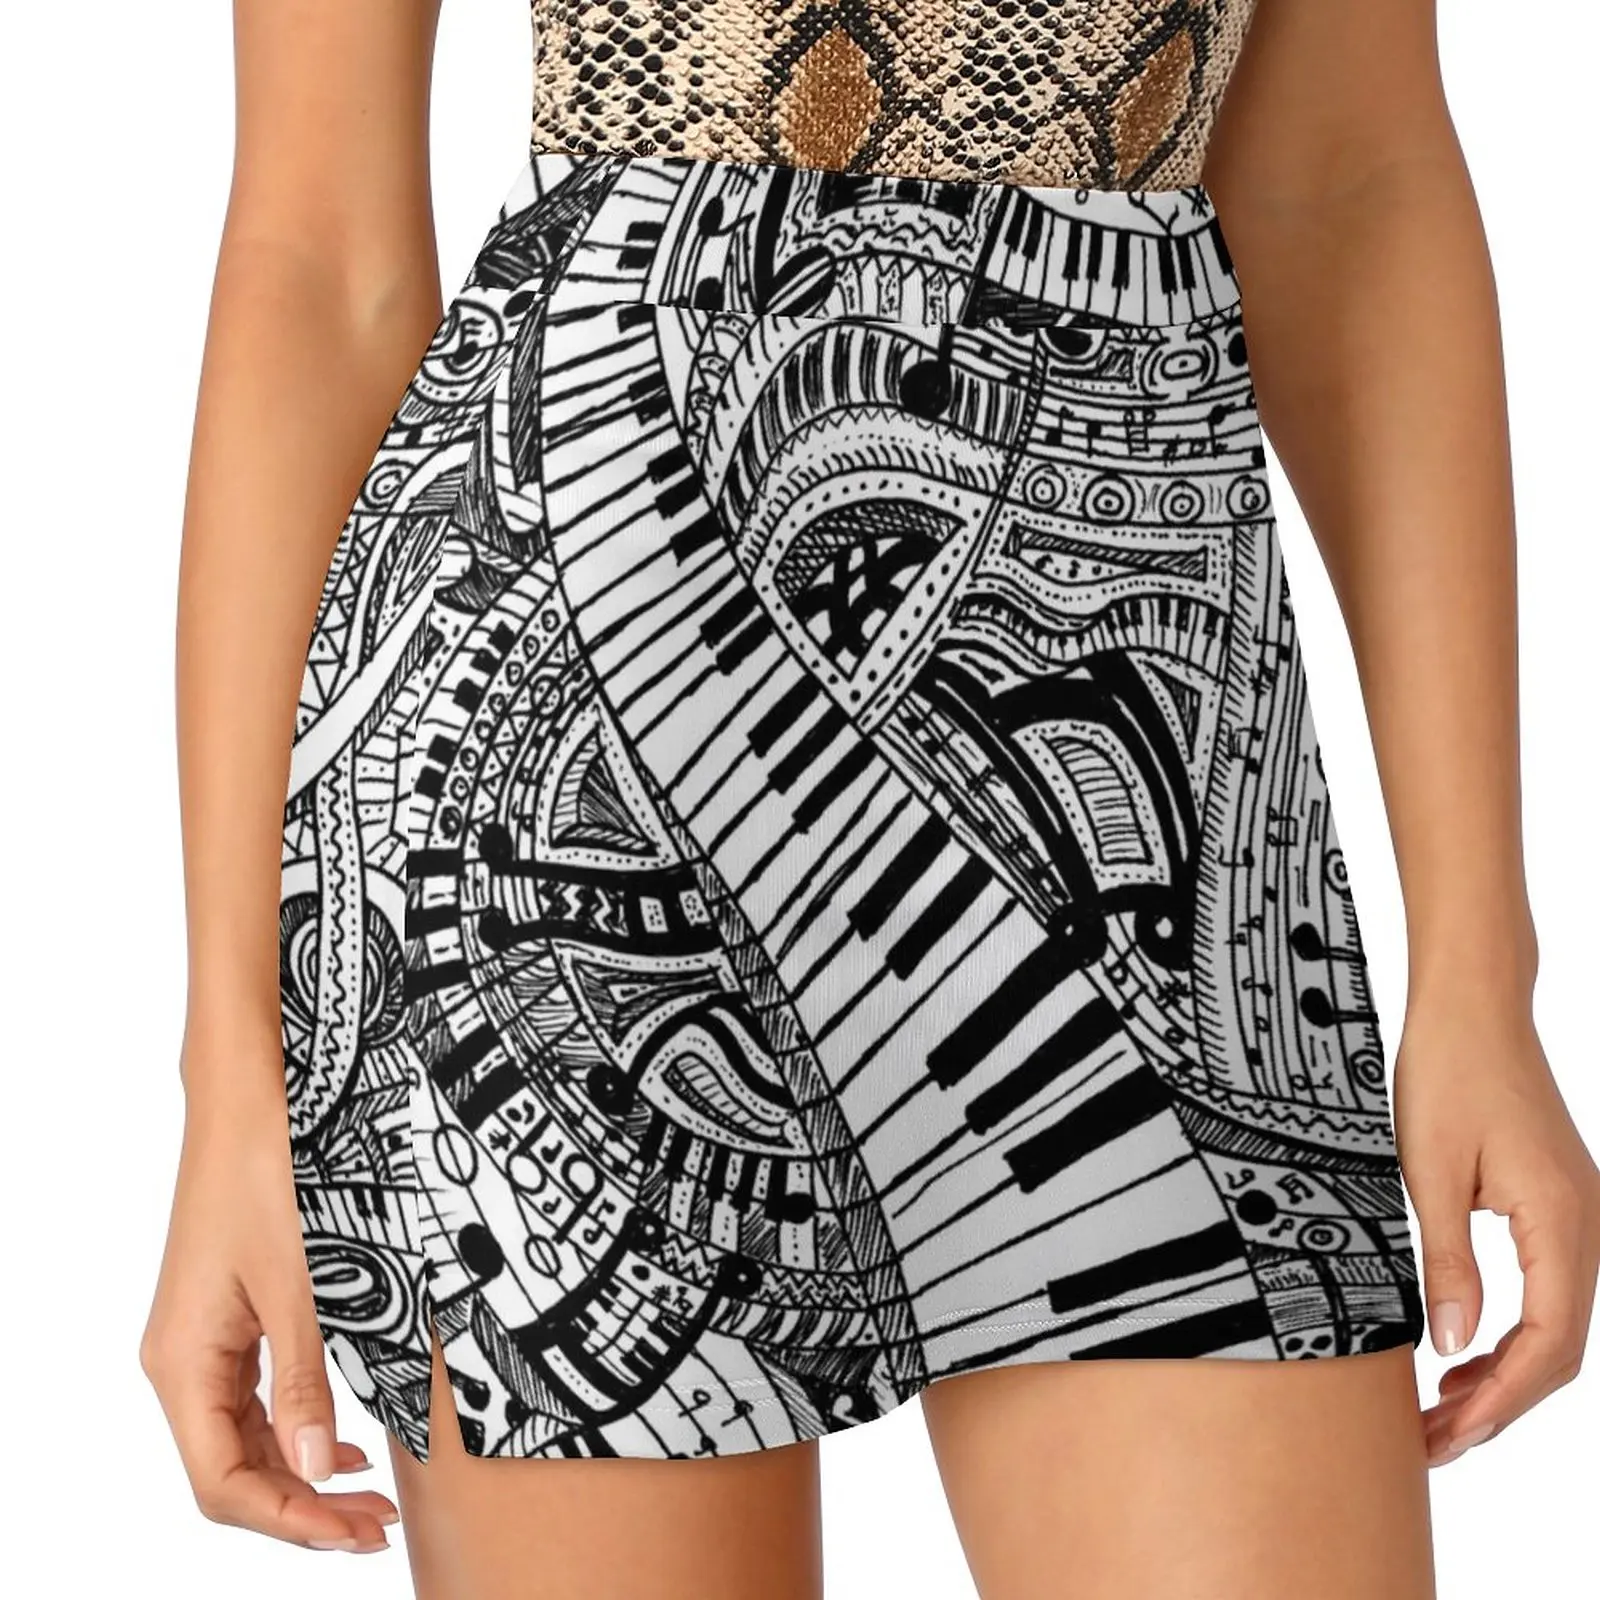 Classical music doodle with piano keyboard Light Proof Trouser Skirt novelty in clothes festival outfit women extreme mini dress dance music sex romance light proof trouser skirt clothing female night club outfit sexy skirt